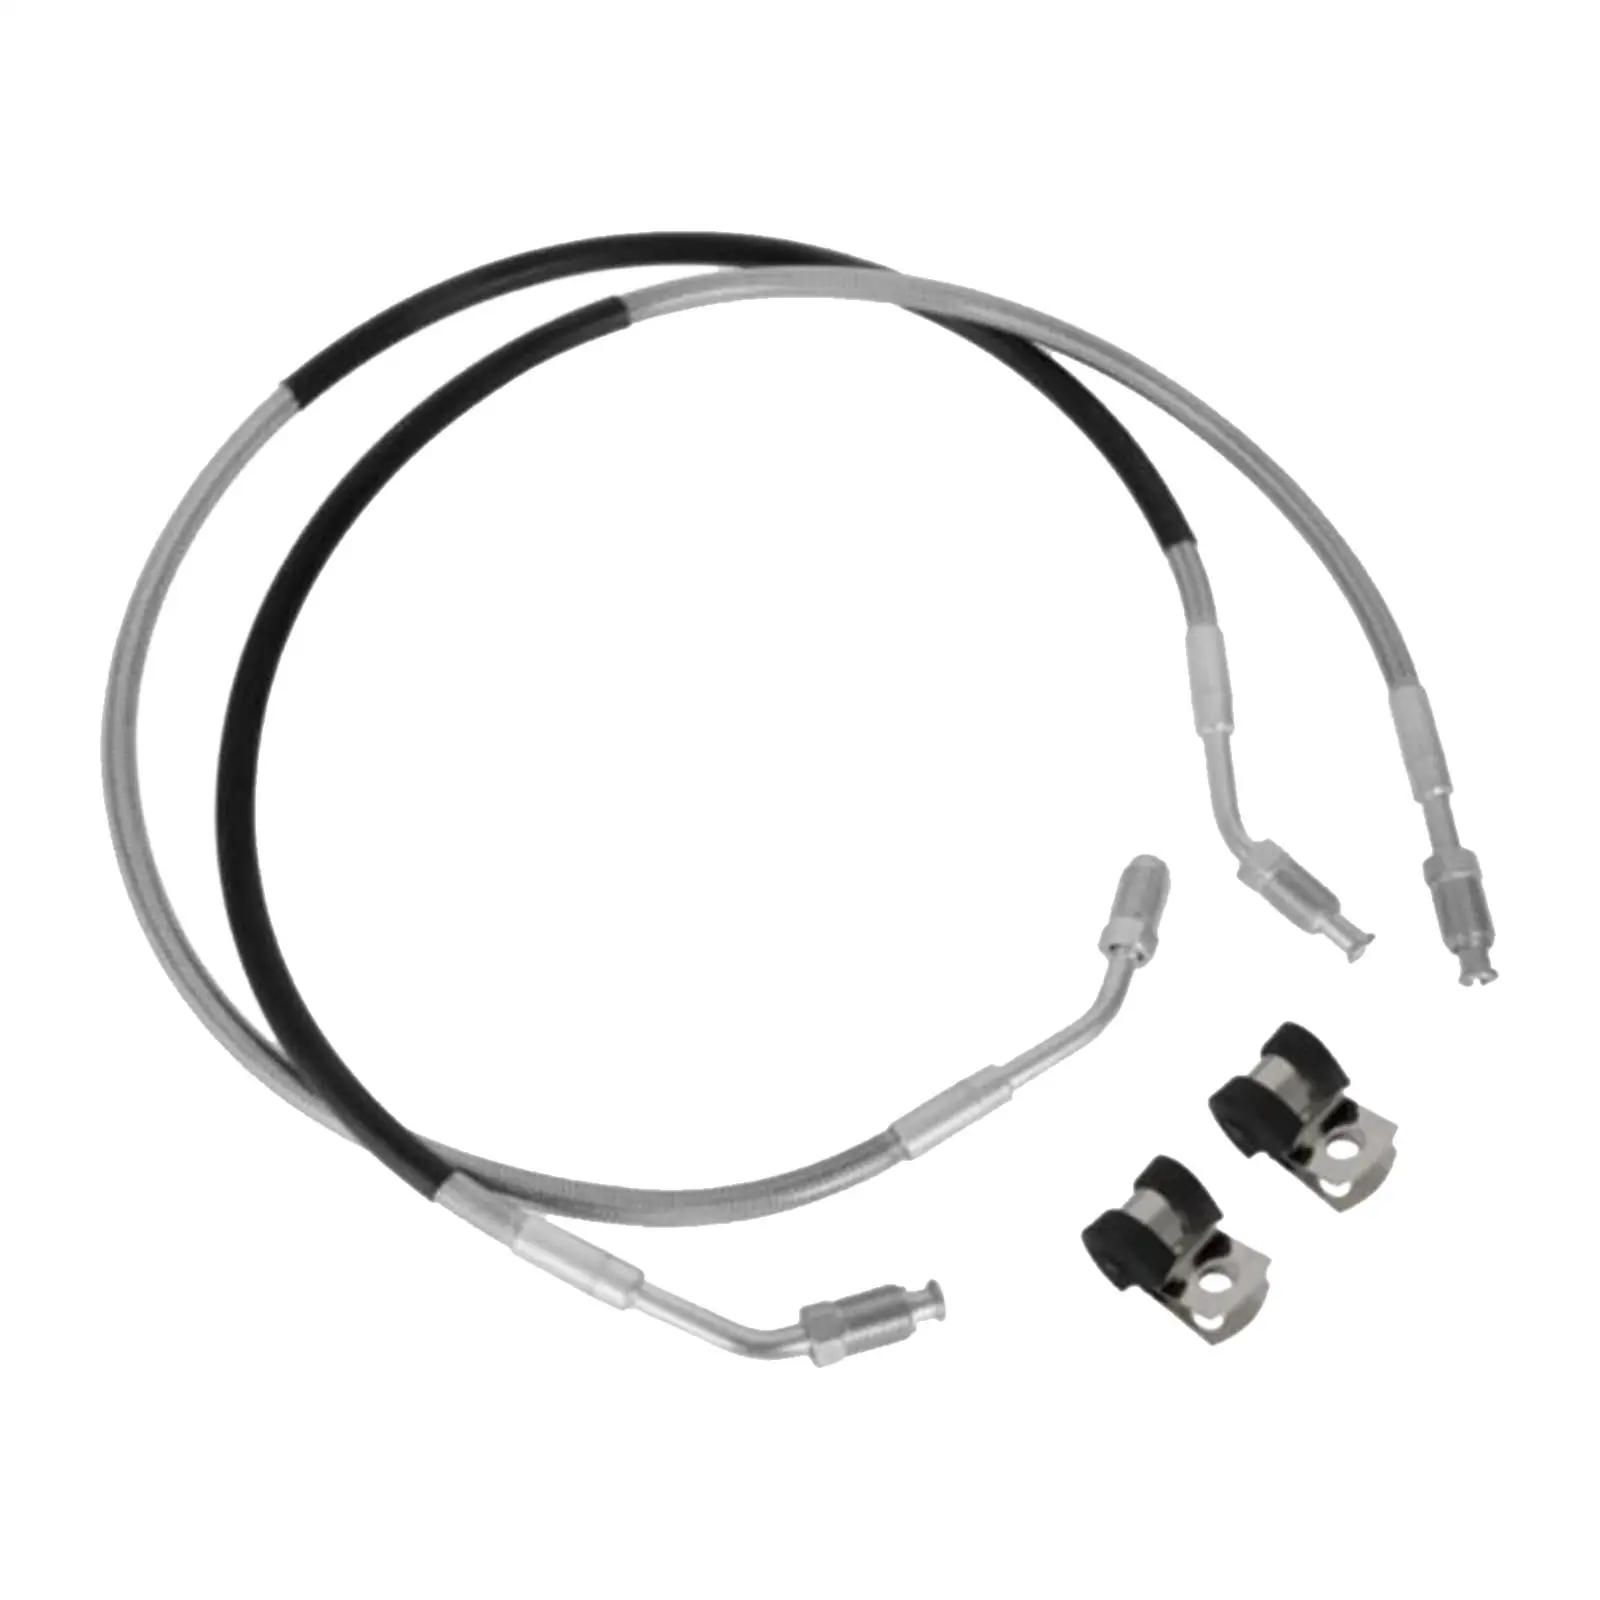 Front Left Right Brake Line 1930752 1930753 with Fittings for Polaris ATV Xpress 300 400 Xpedition 325 425 Worker 335 500